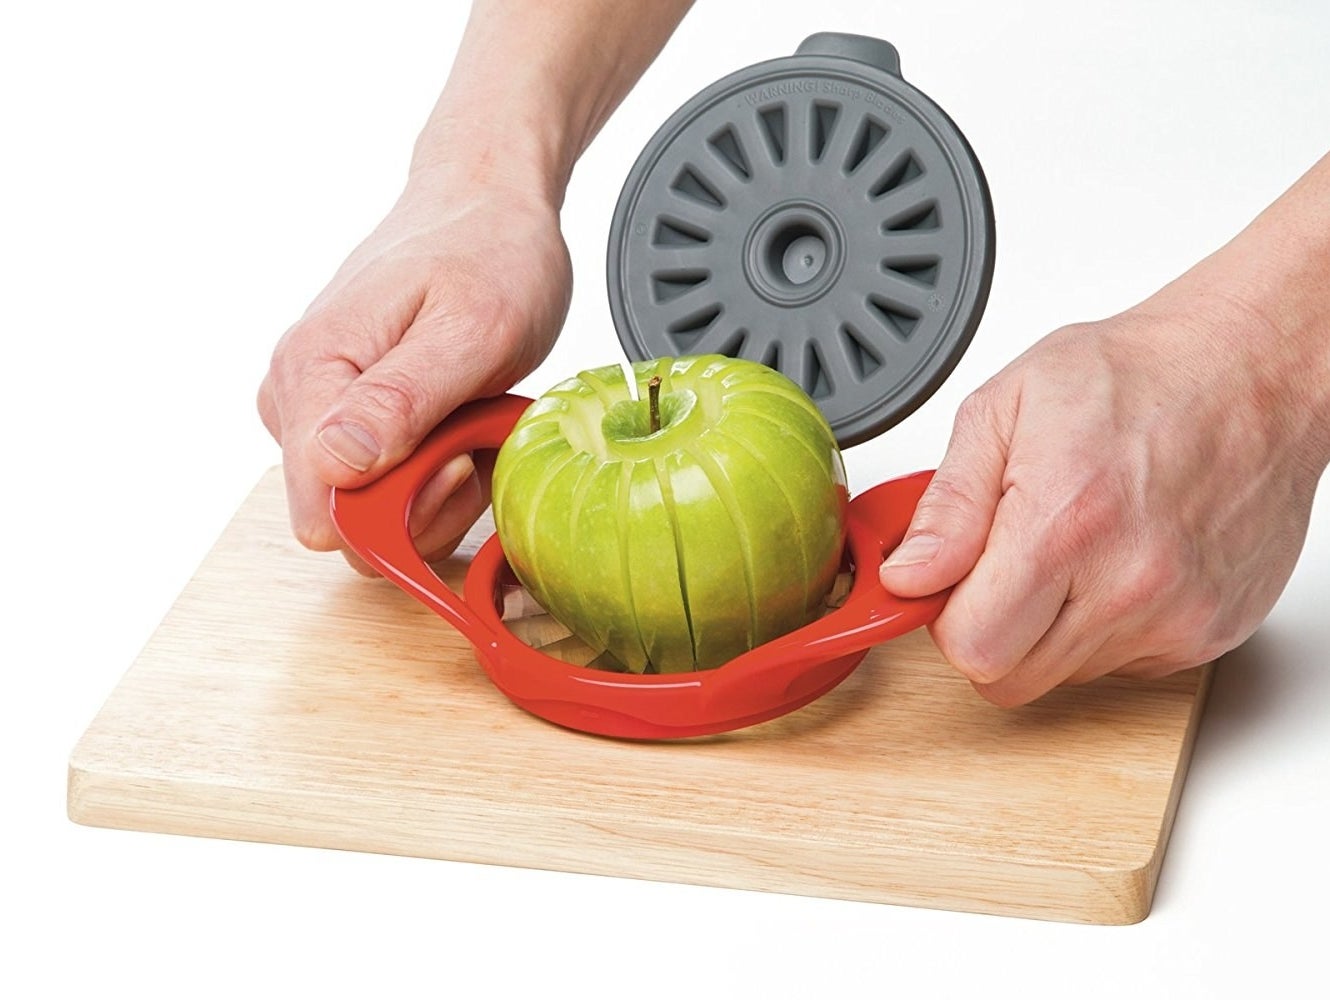 A person using the tool to cut an apple